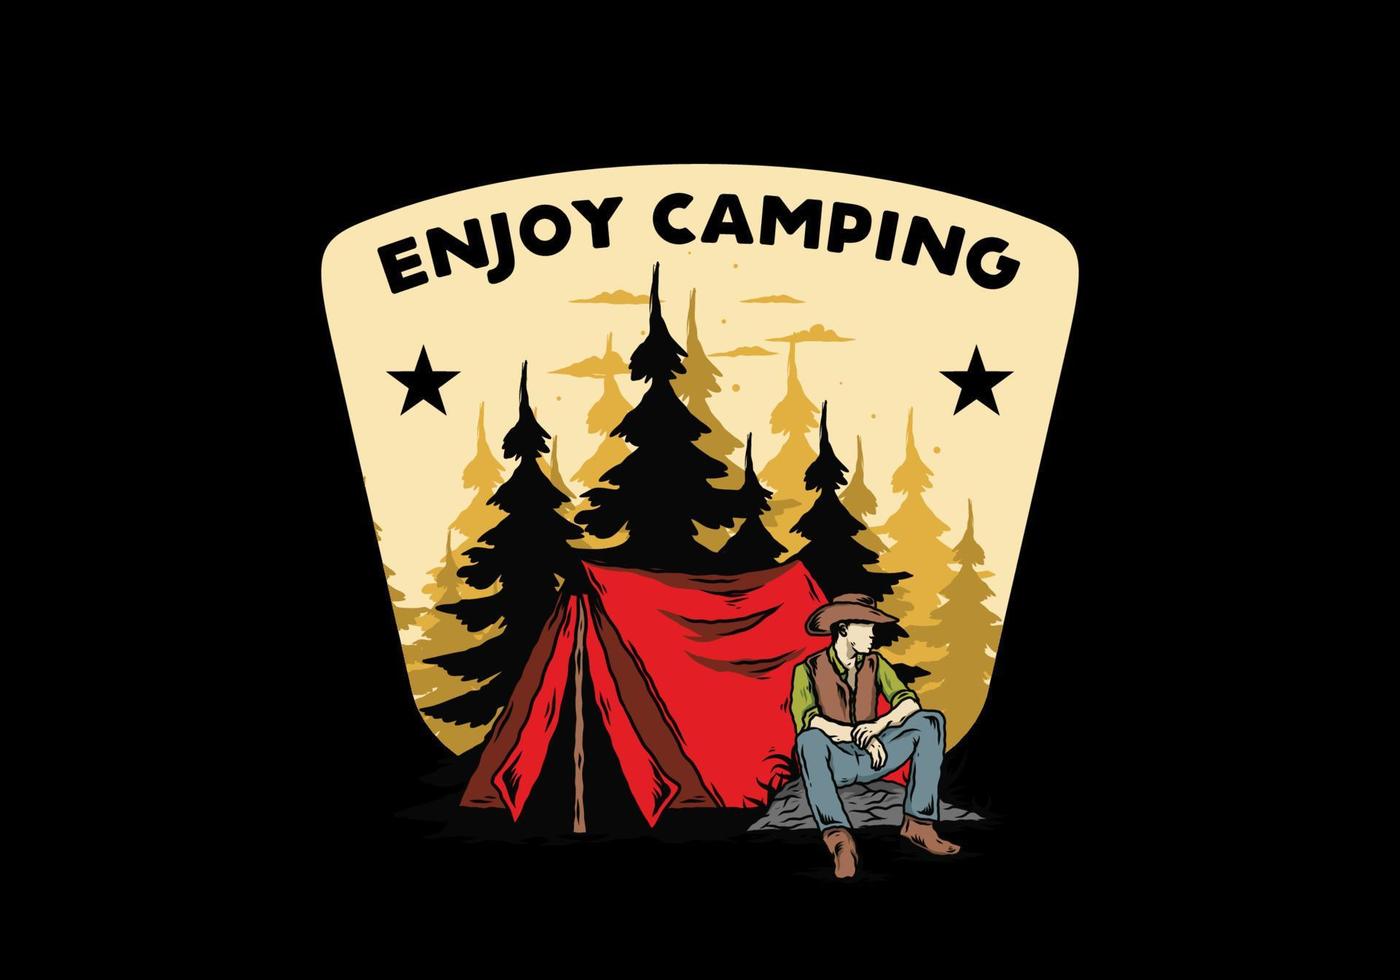 Man wearing a cowboy hat sitting in front of the tent illustration vector